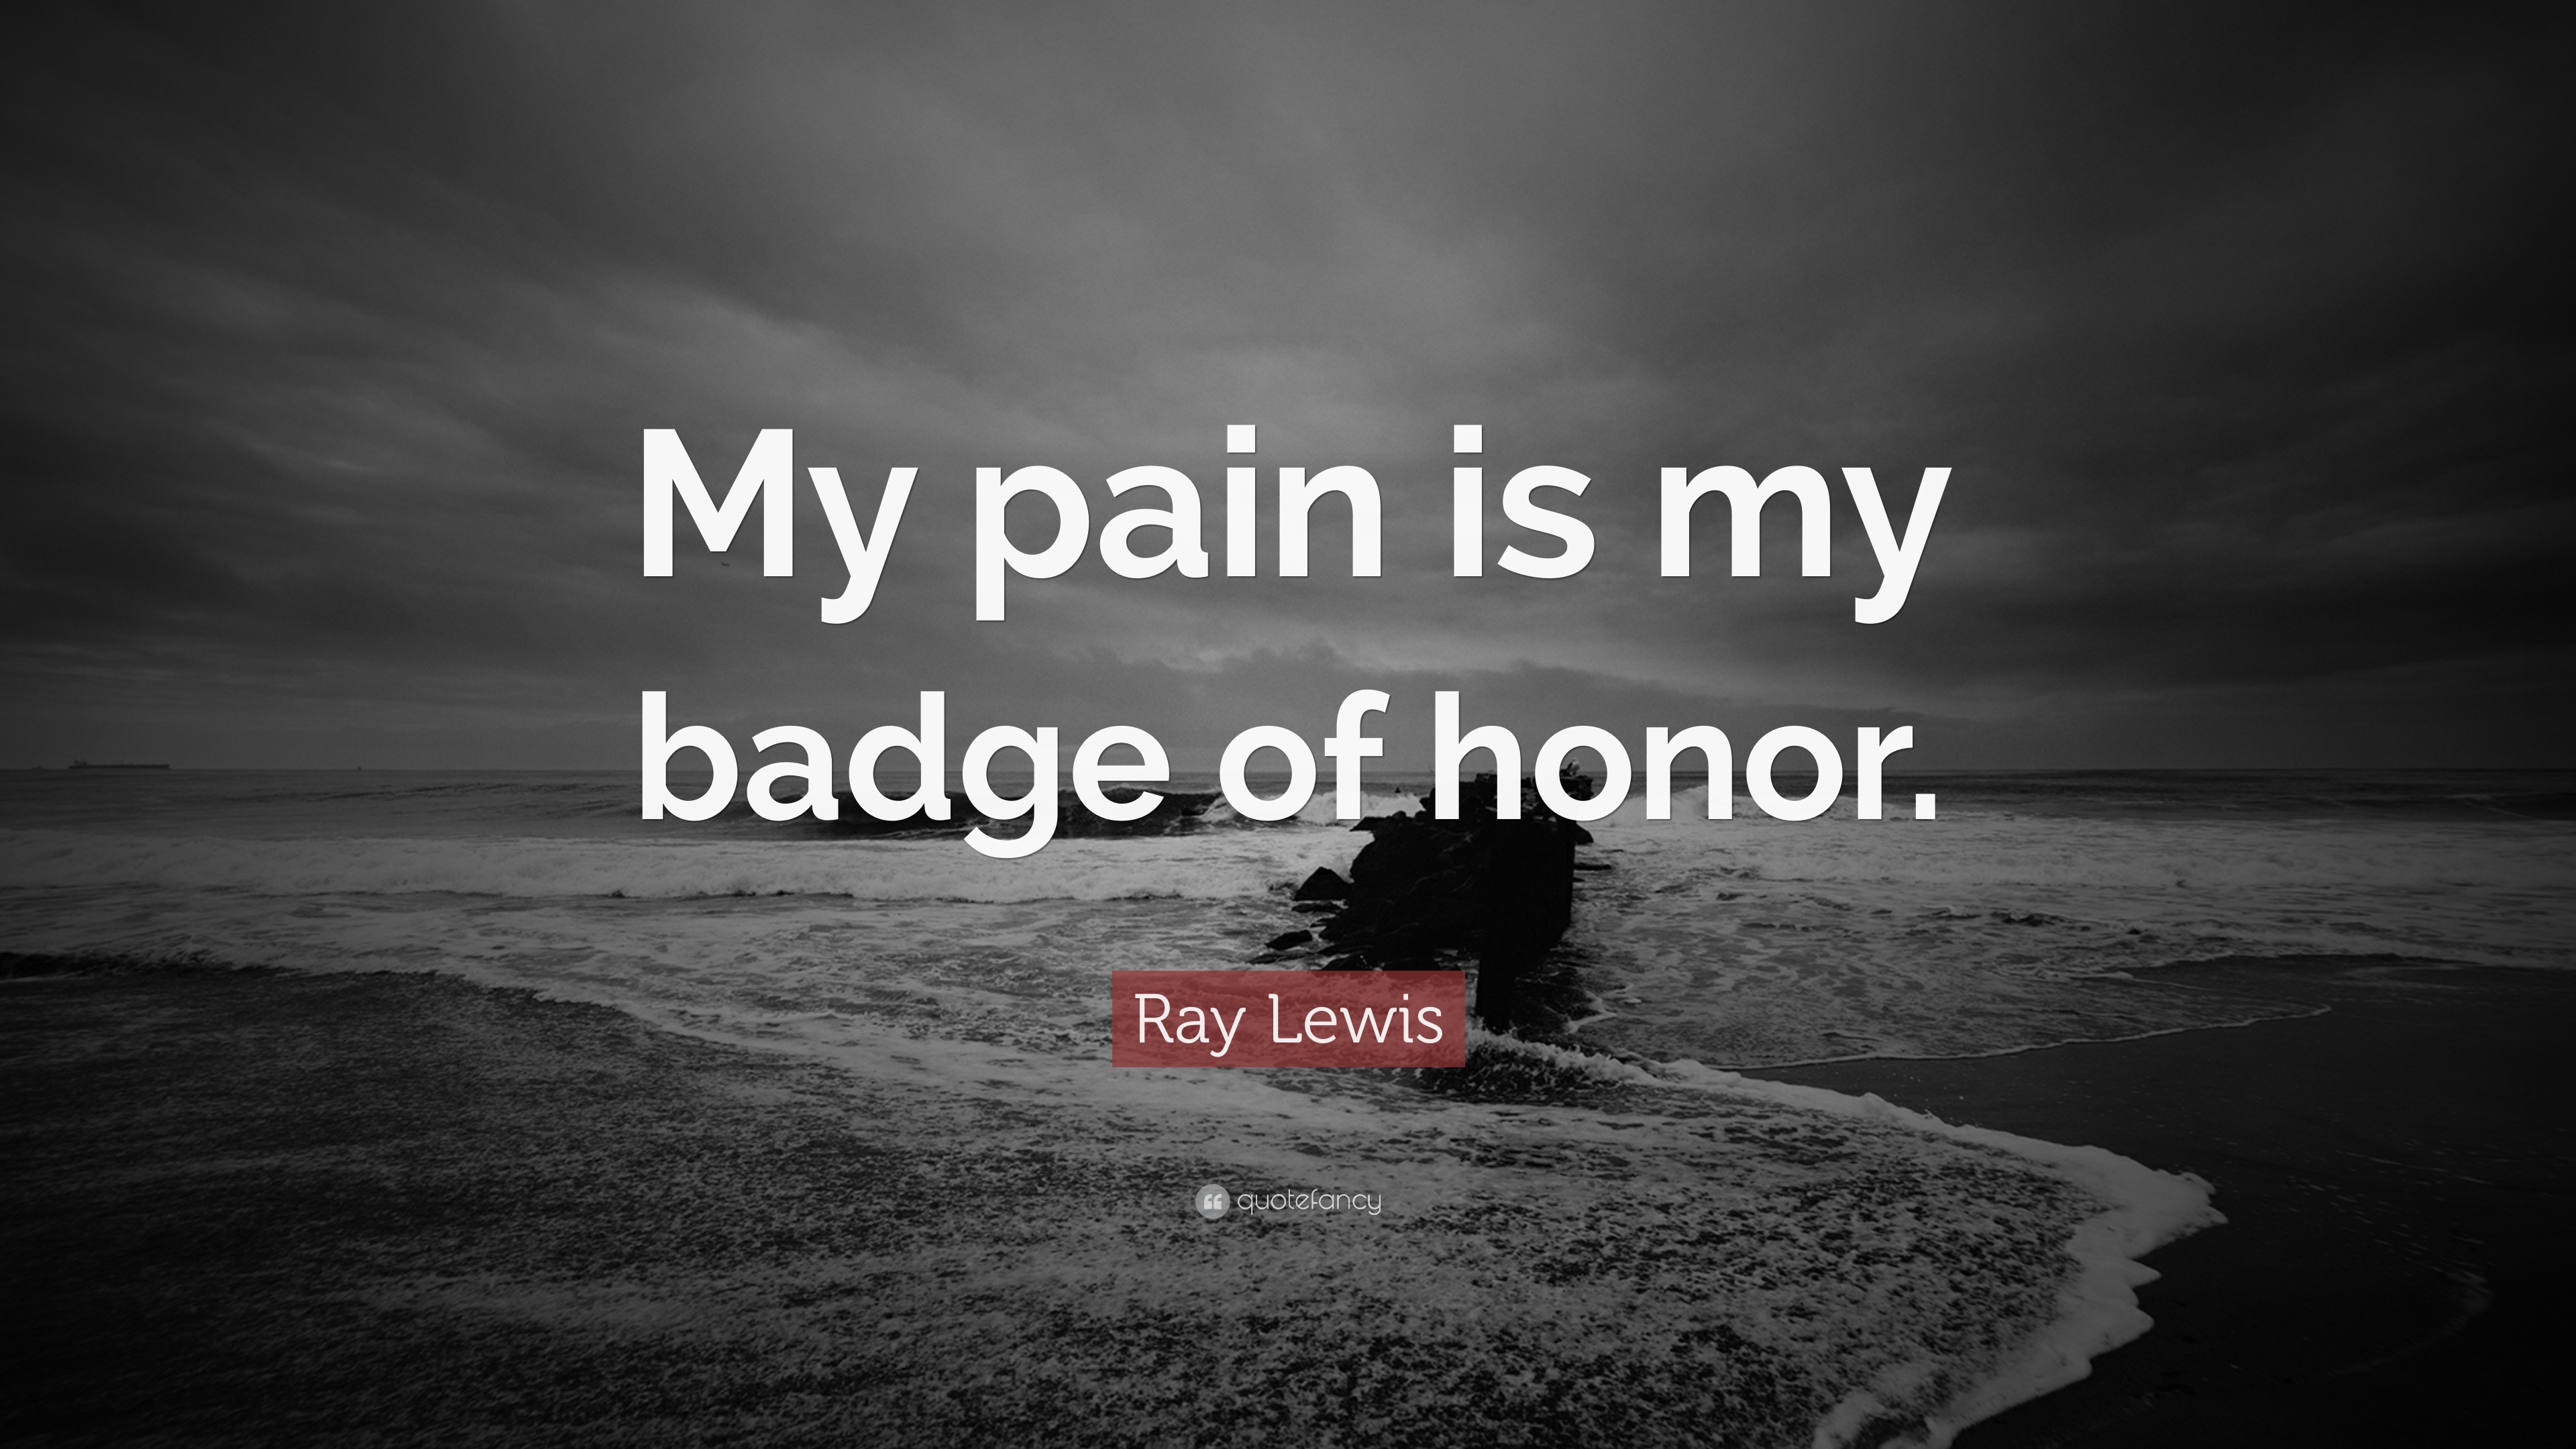 Ray Lewis Quotes (18 wallpapers) - Quotefancy